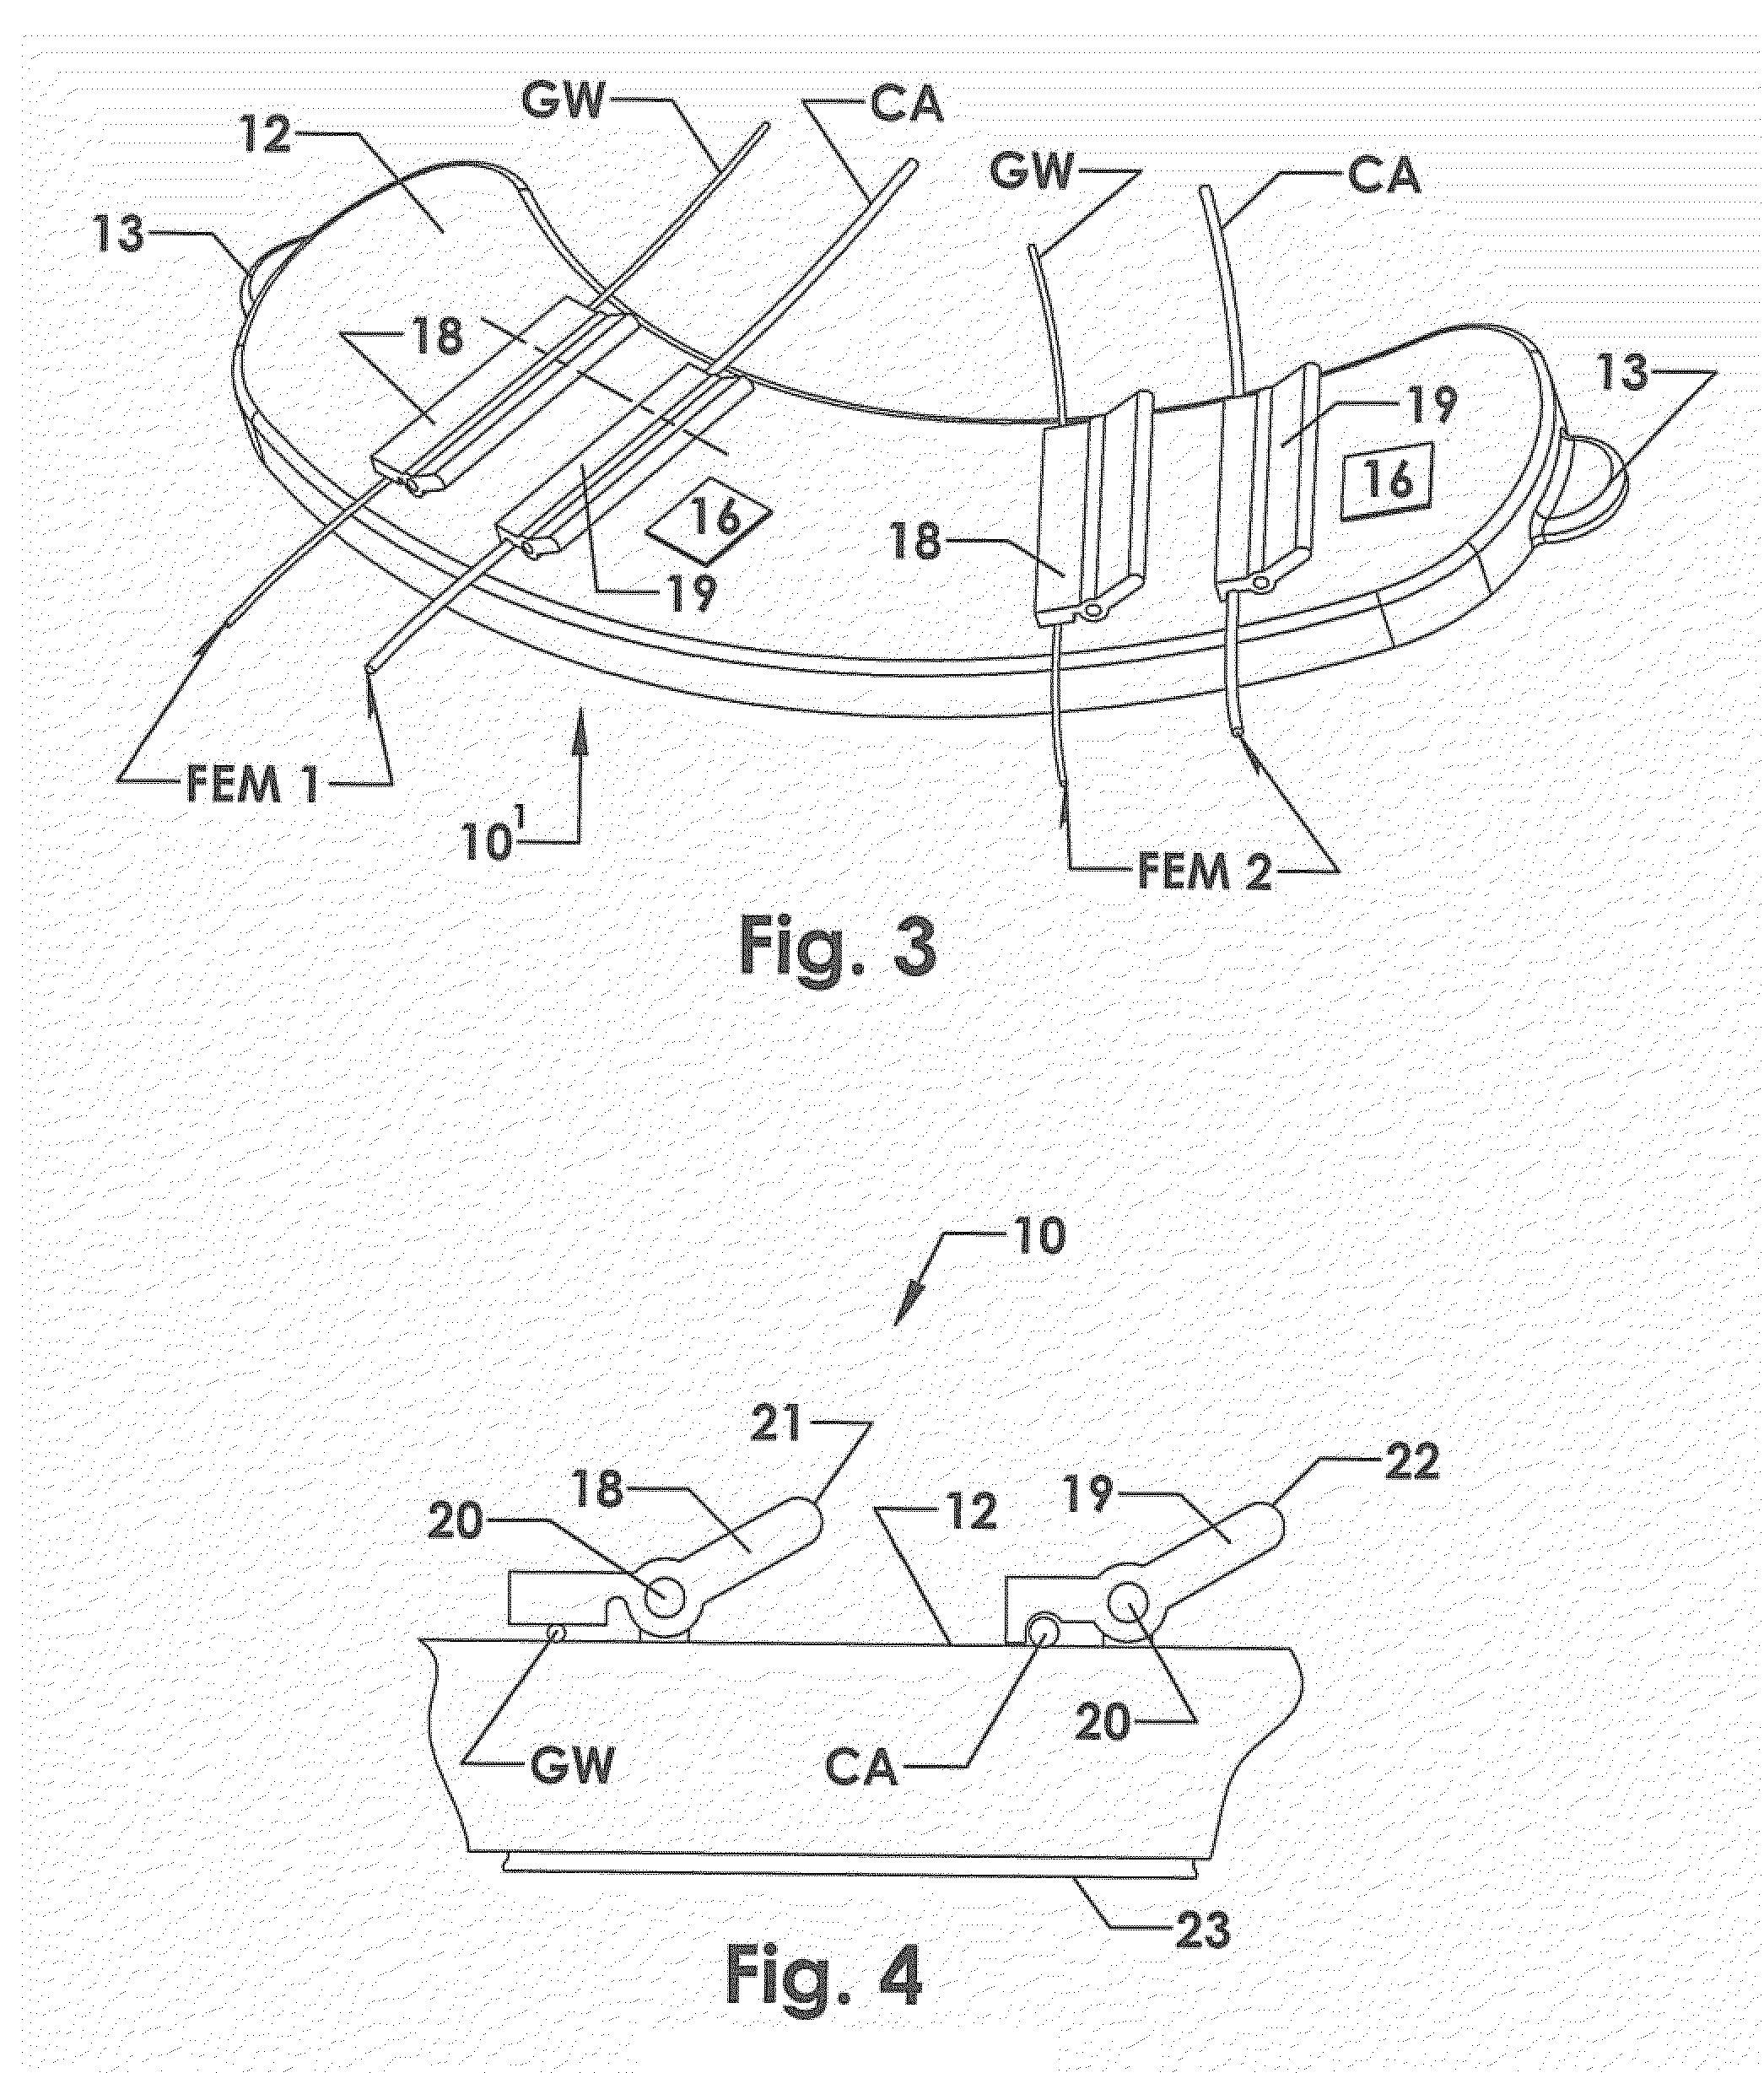 Guidewire and catheter management device